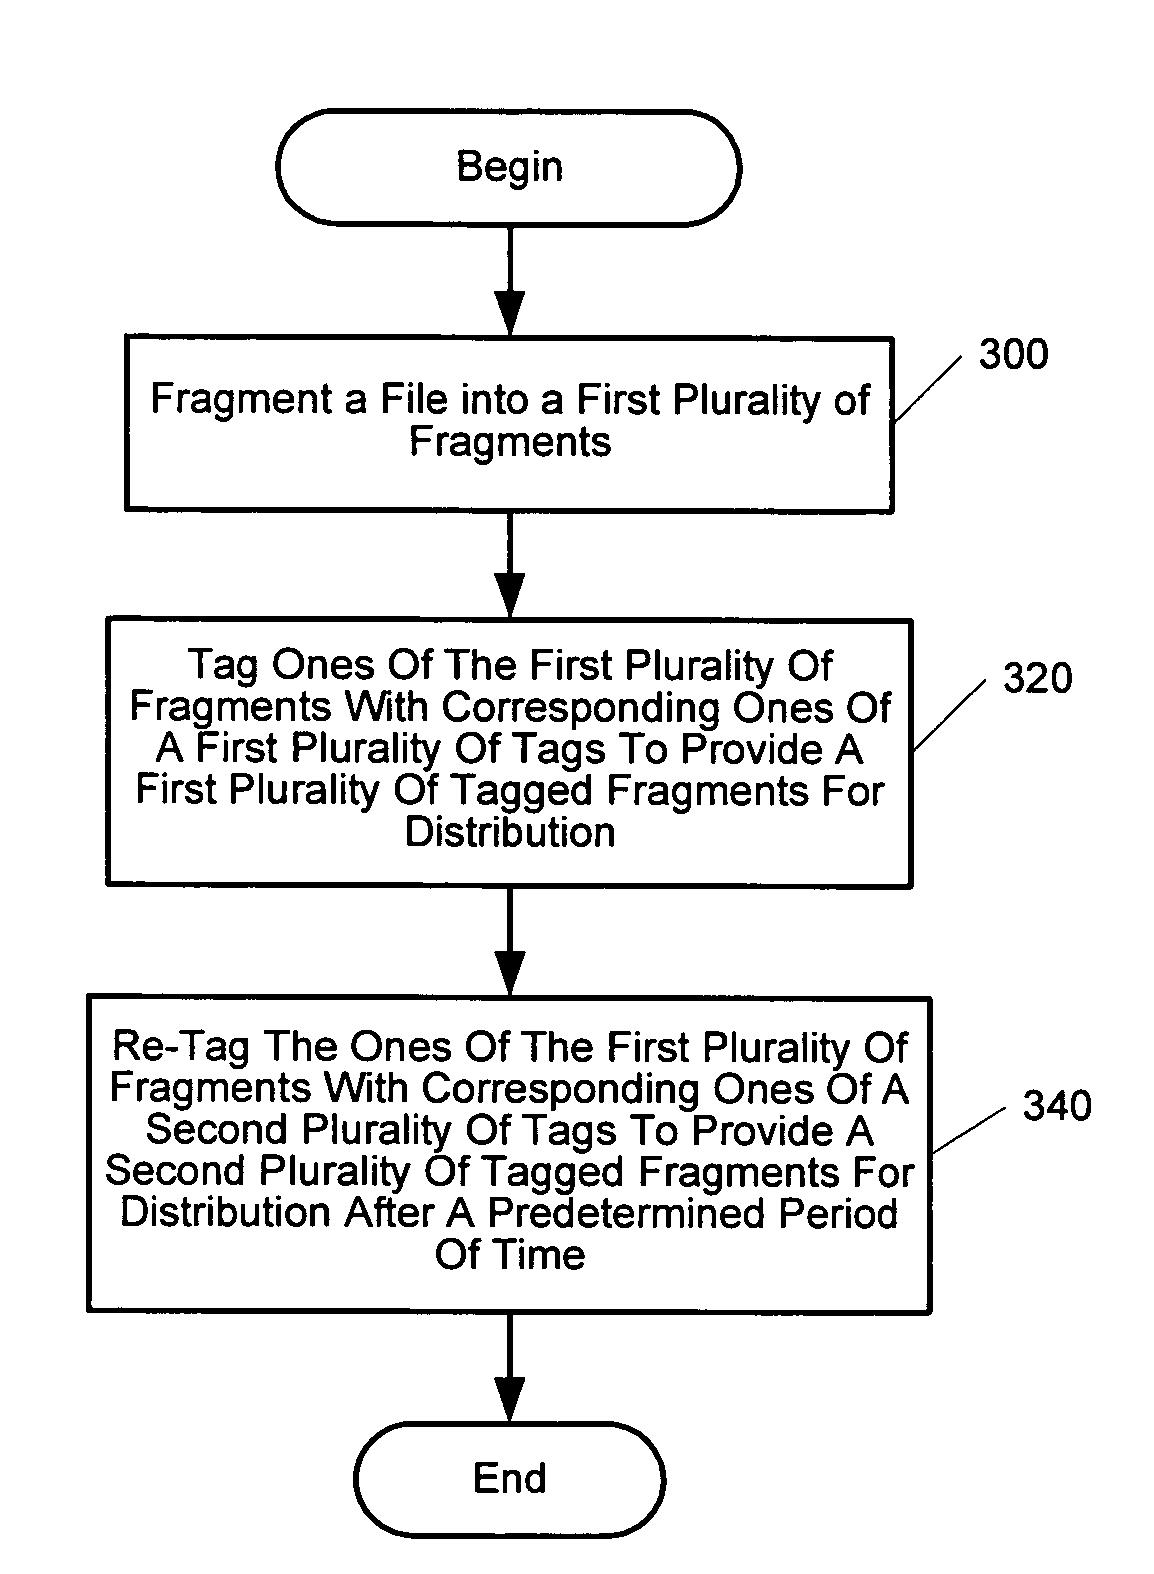 Methods, systems, and computer program products for controlling distribution of digital content in a file sharing system using license-based verification, encoded tagging, and time-limited fragment validity